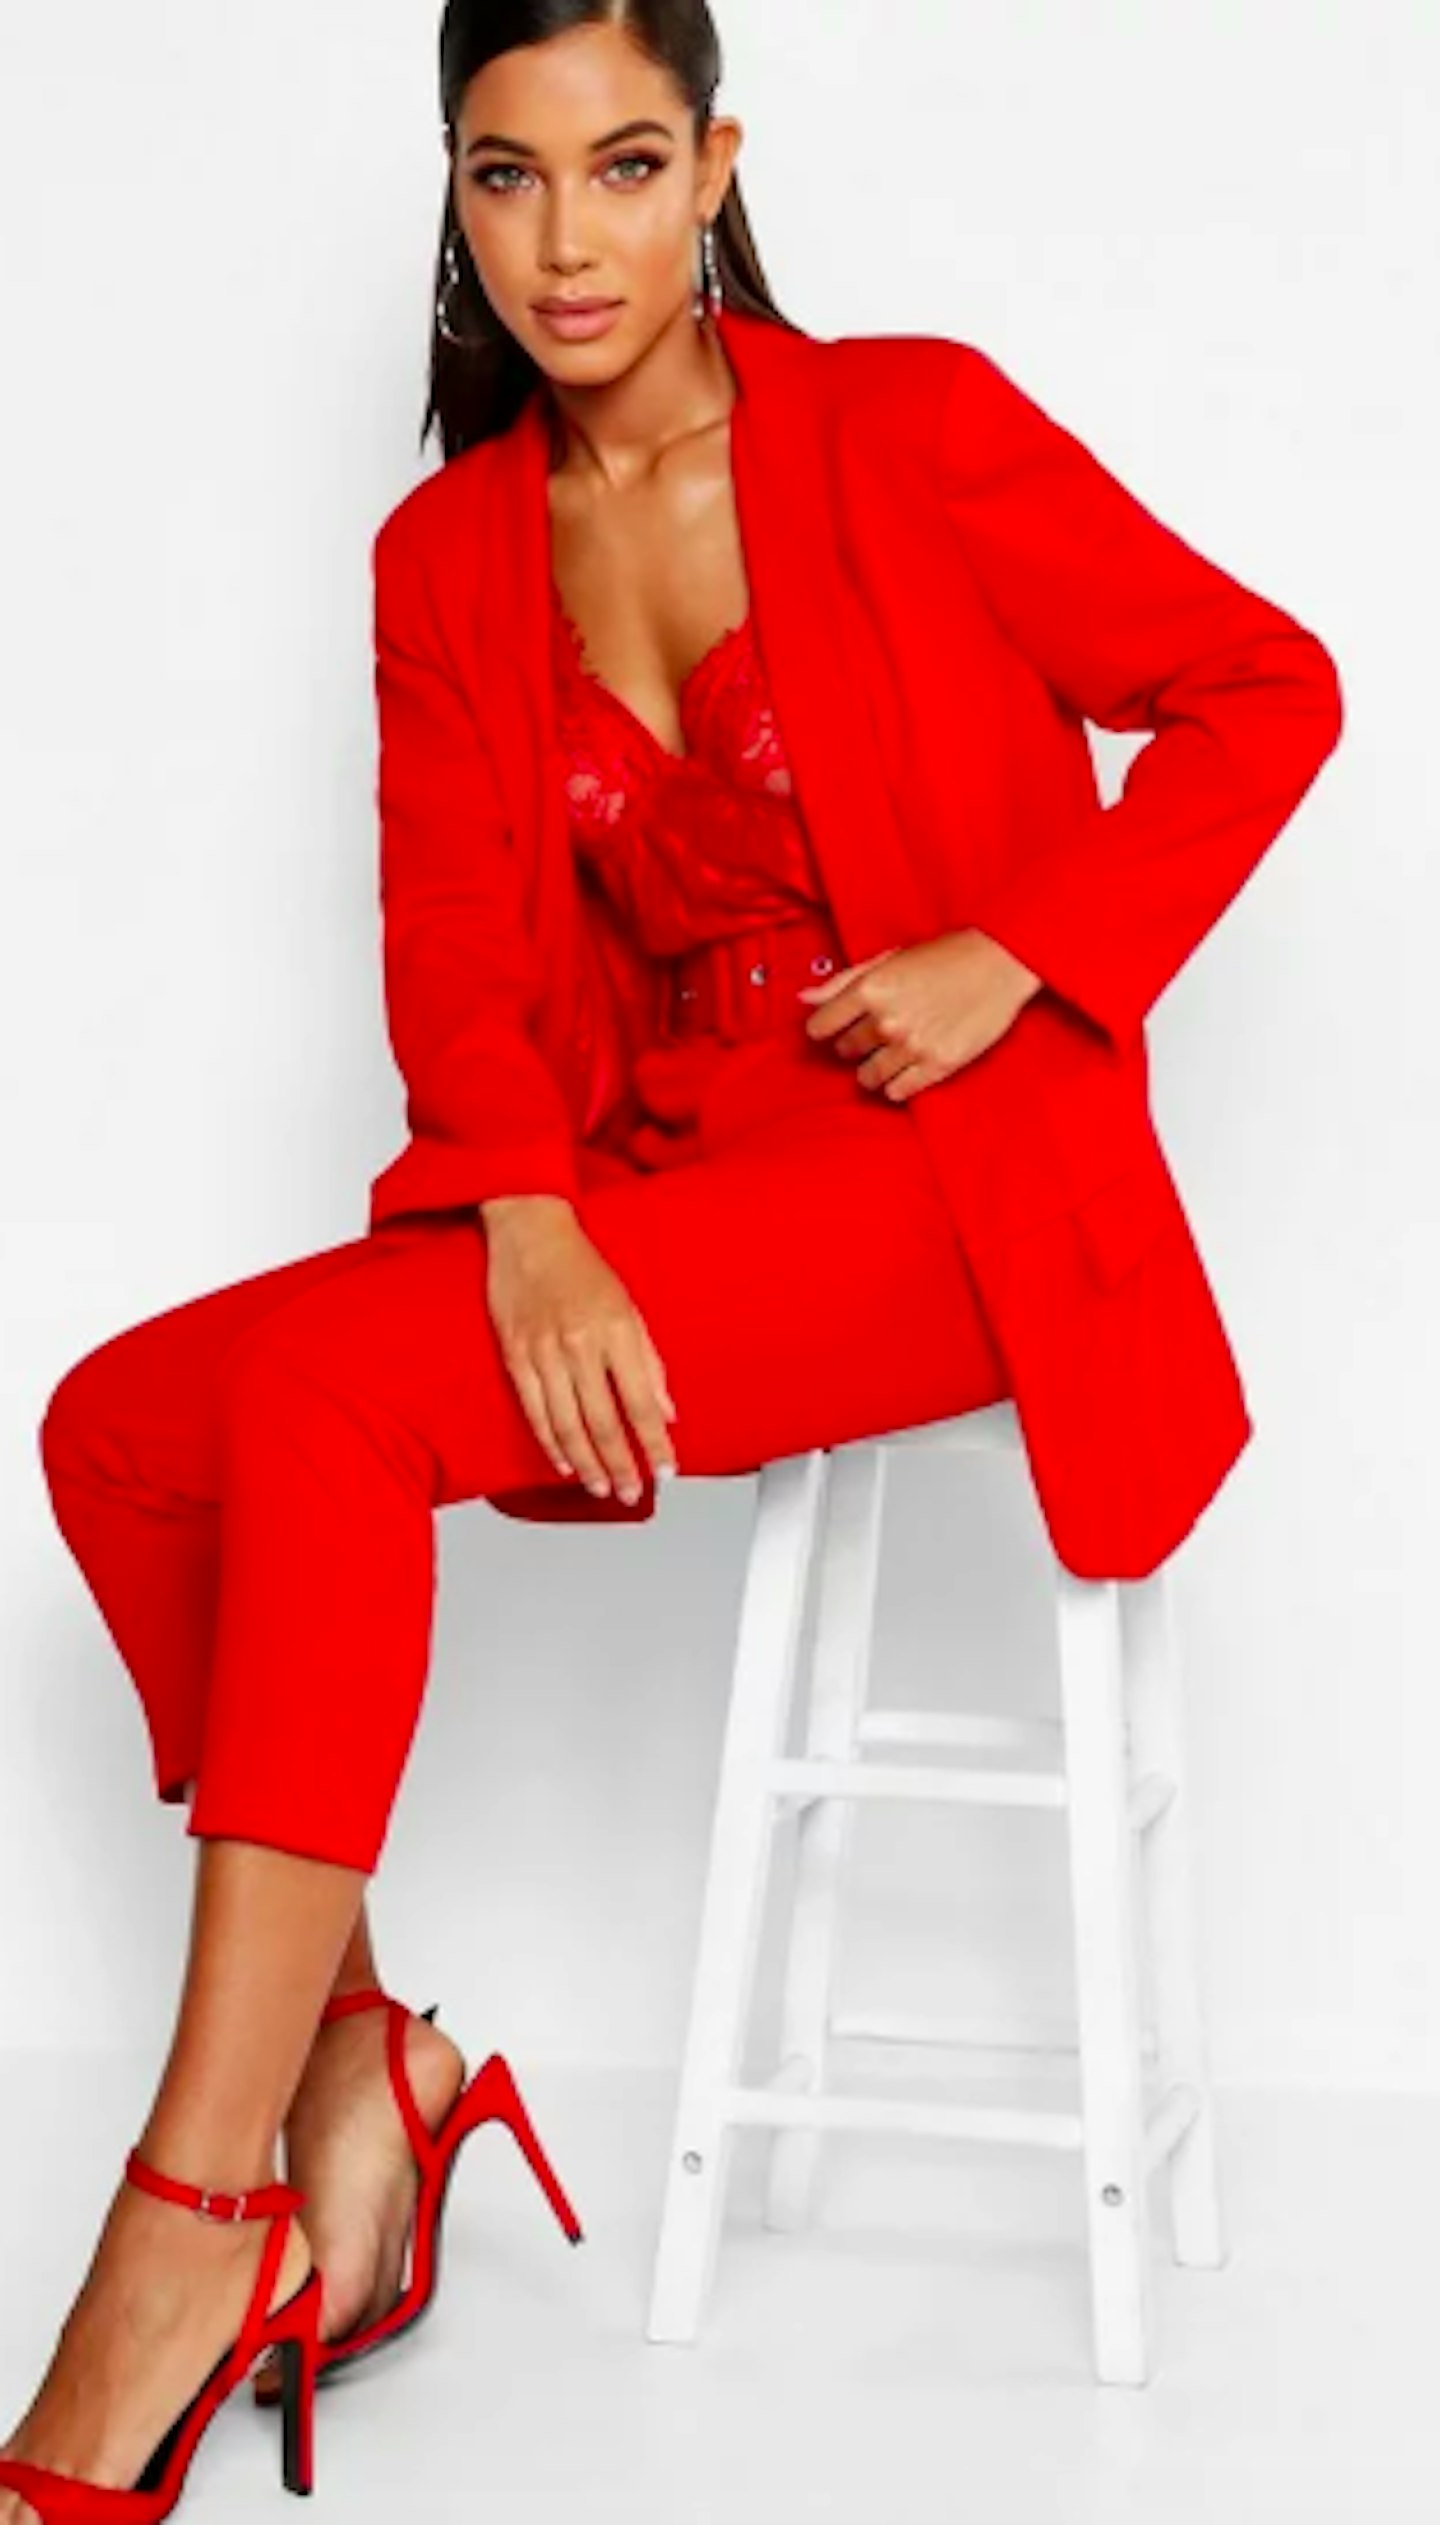 laura whitmore love island final red suit